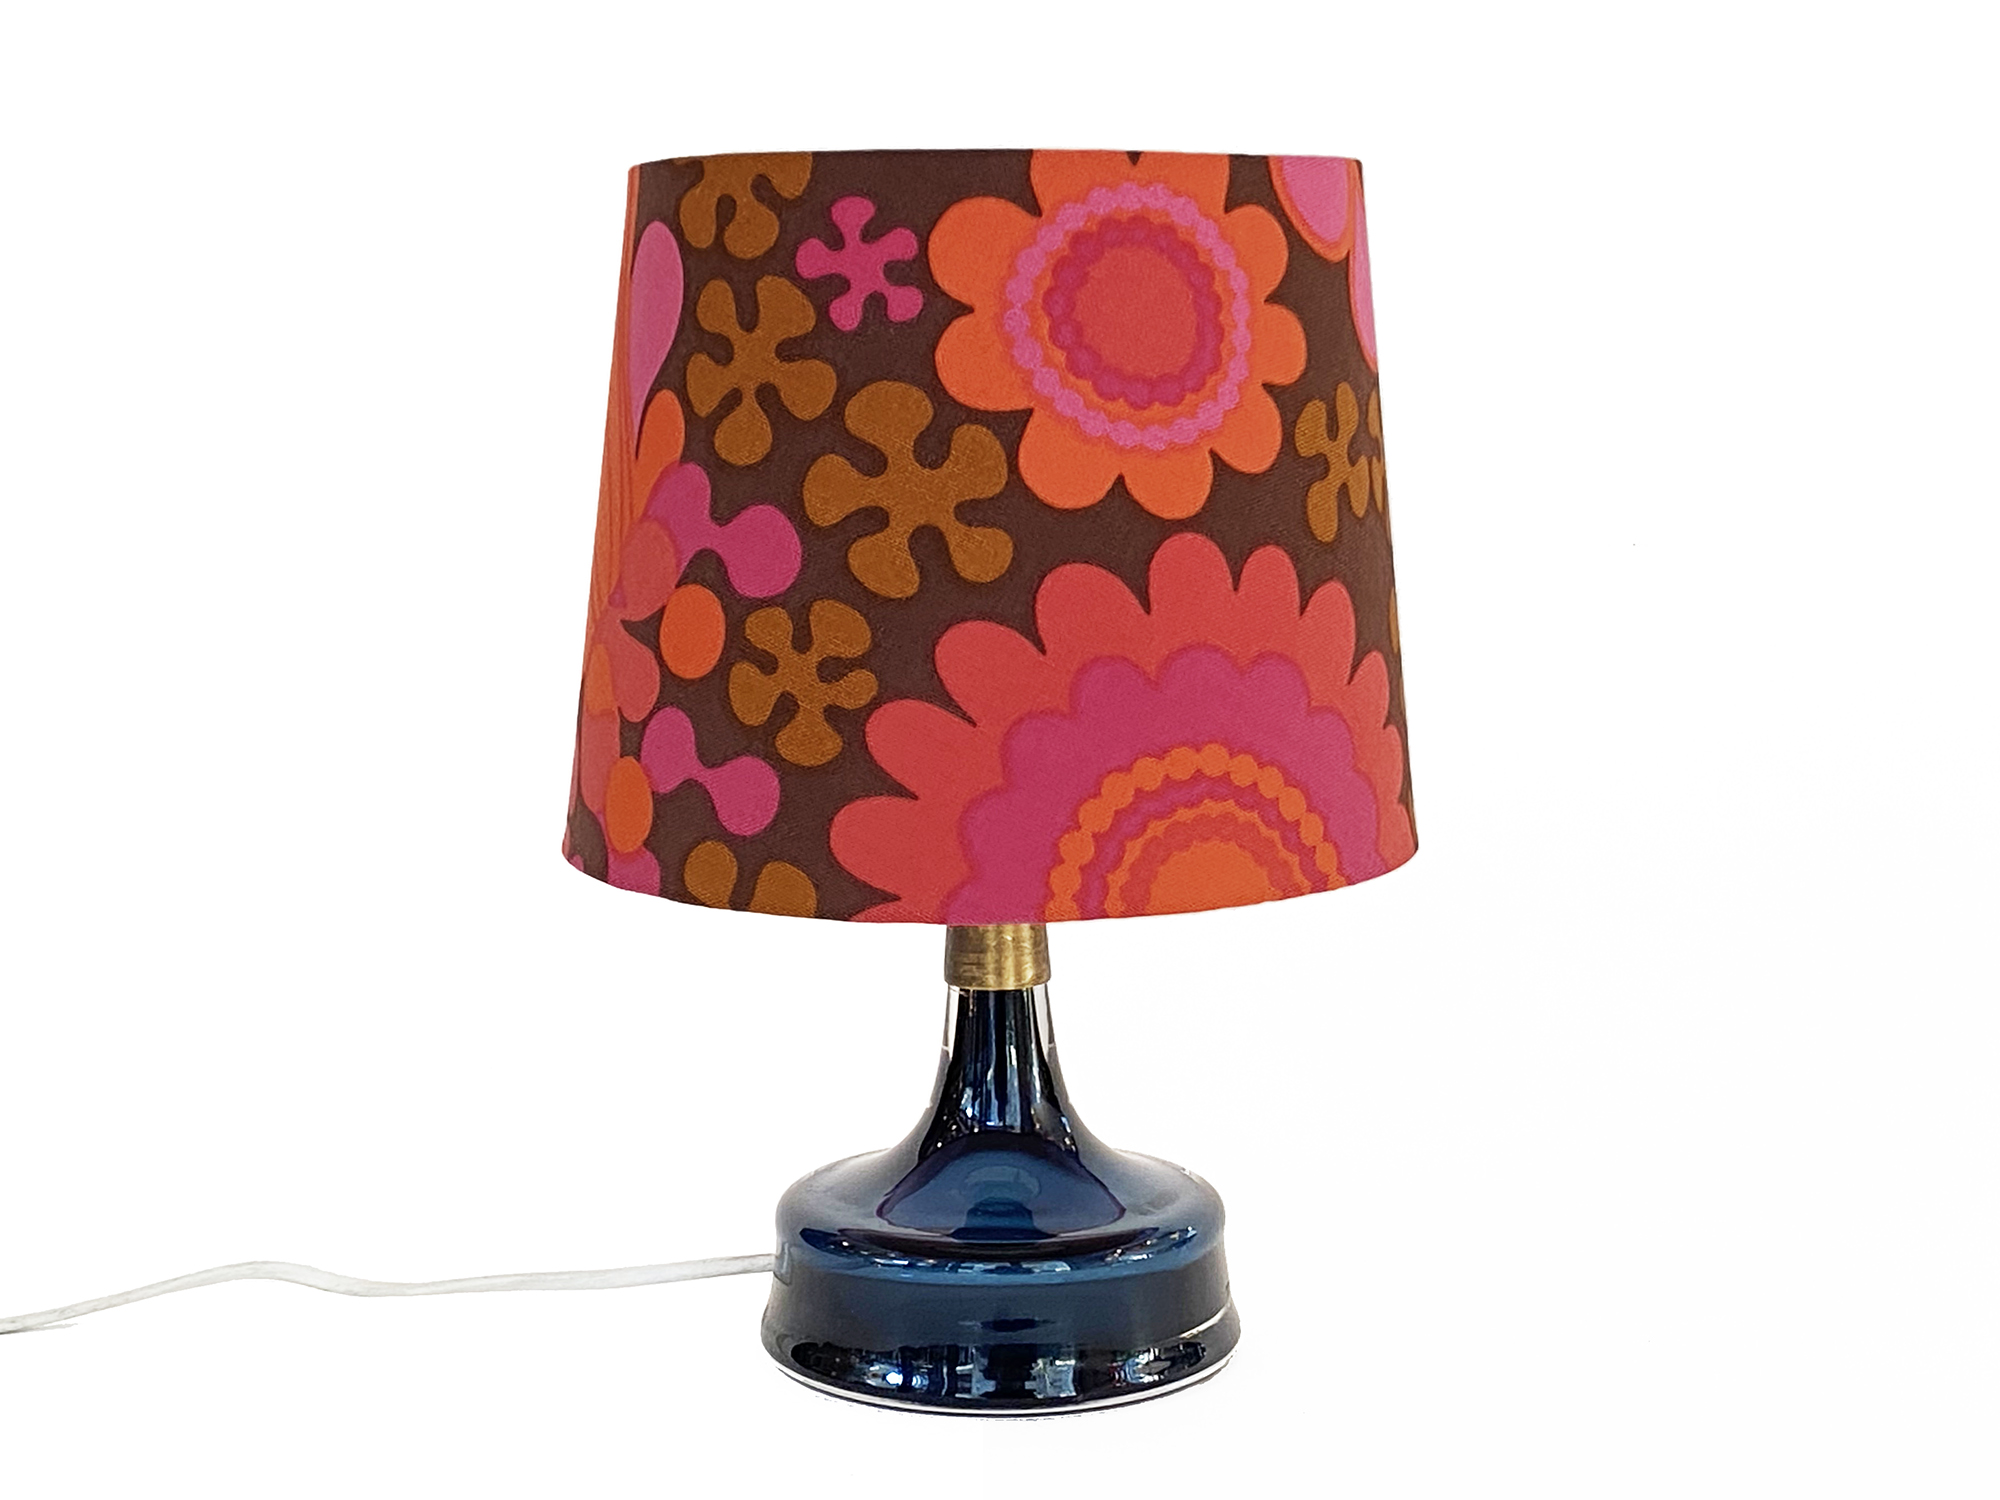 Small table light by Carl Fagerlund for Orrefors. Shade with repurposed vintage fabric by Göta Trägårdh. Sweden 1960s.